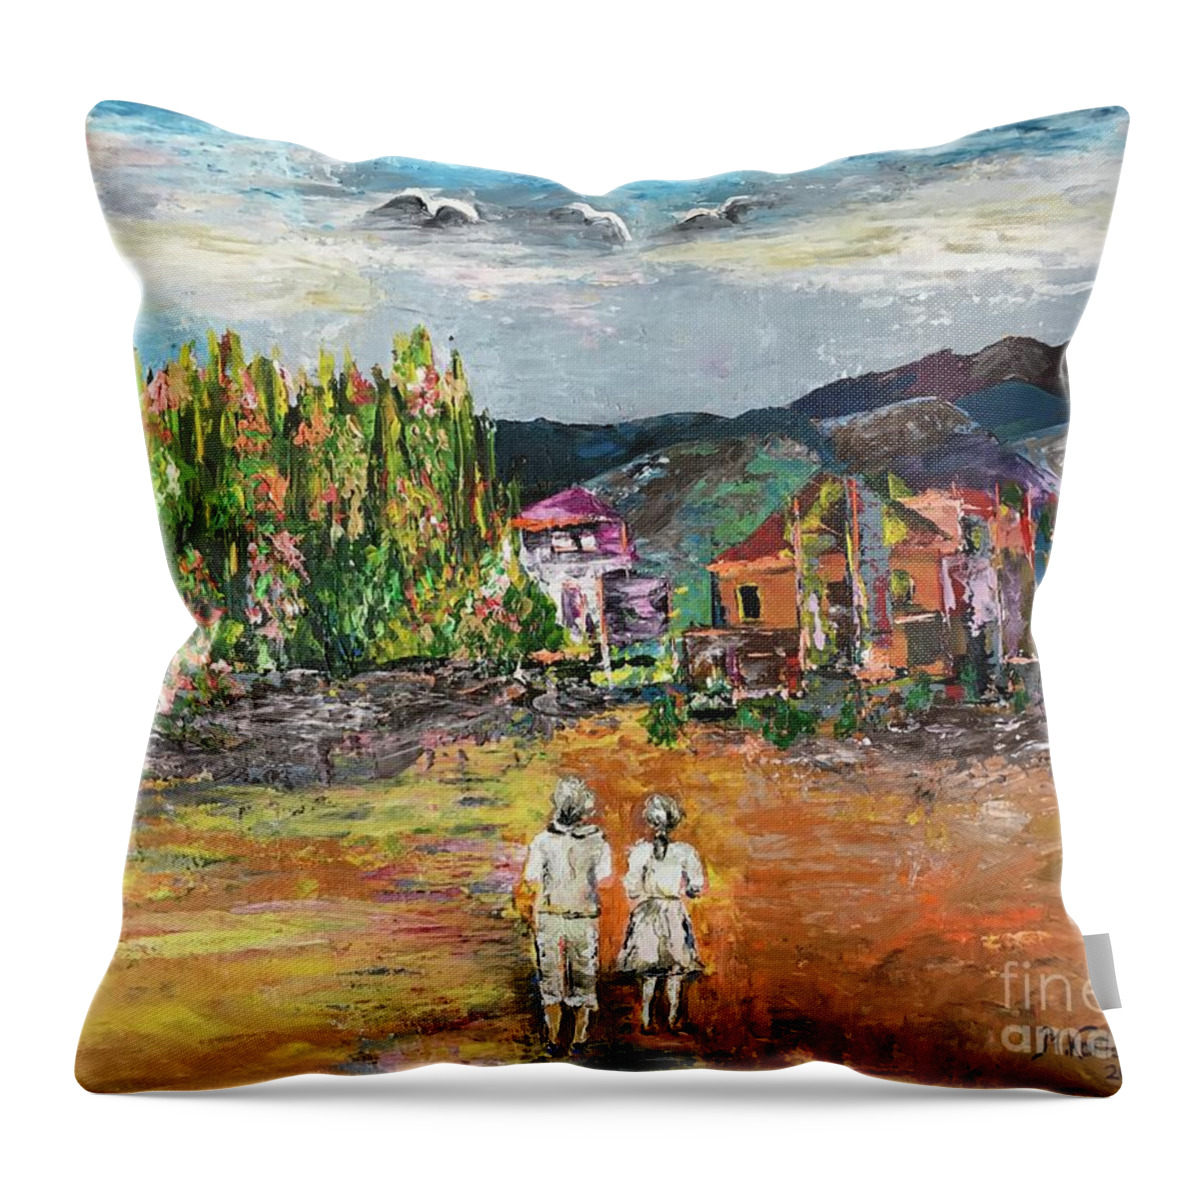 Original Painting Throw Pillow featuring the painting Small town in the mountains by Maria Karlosak